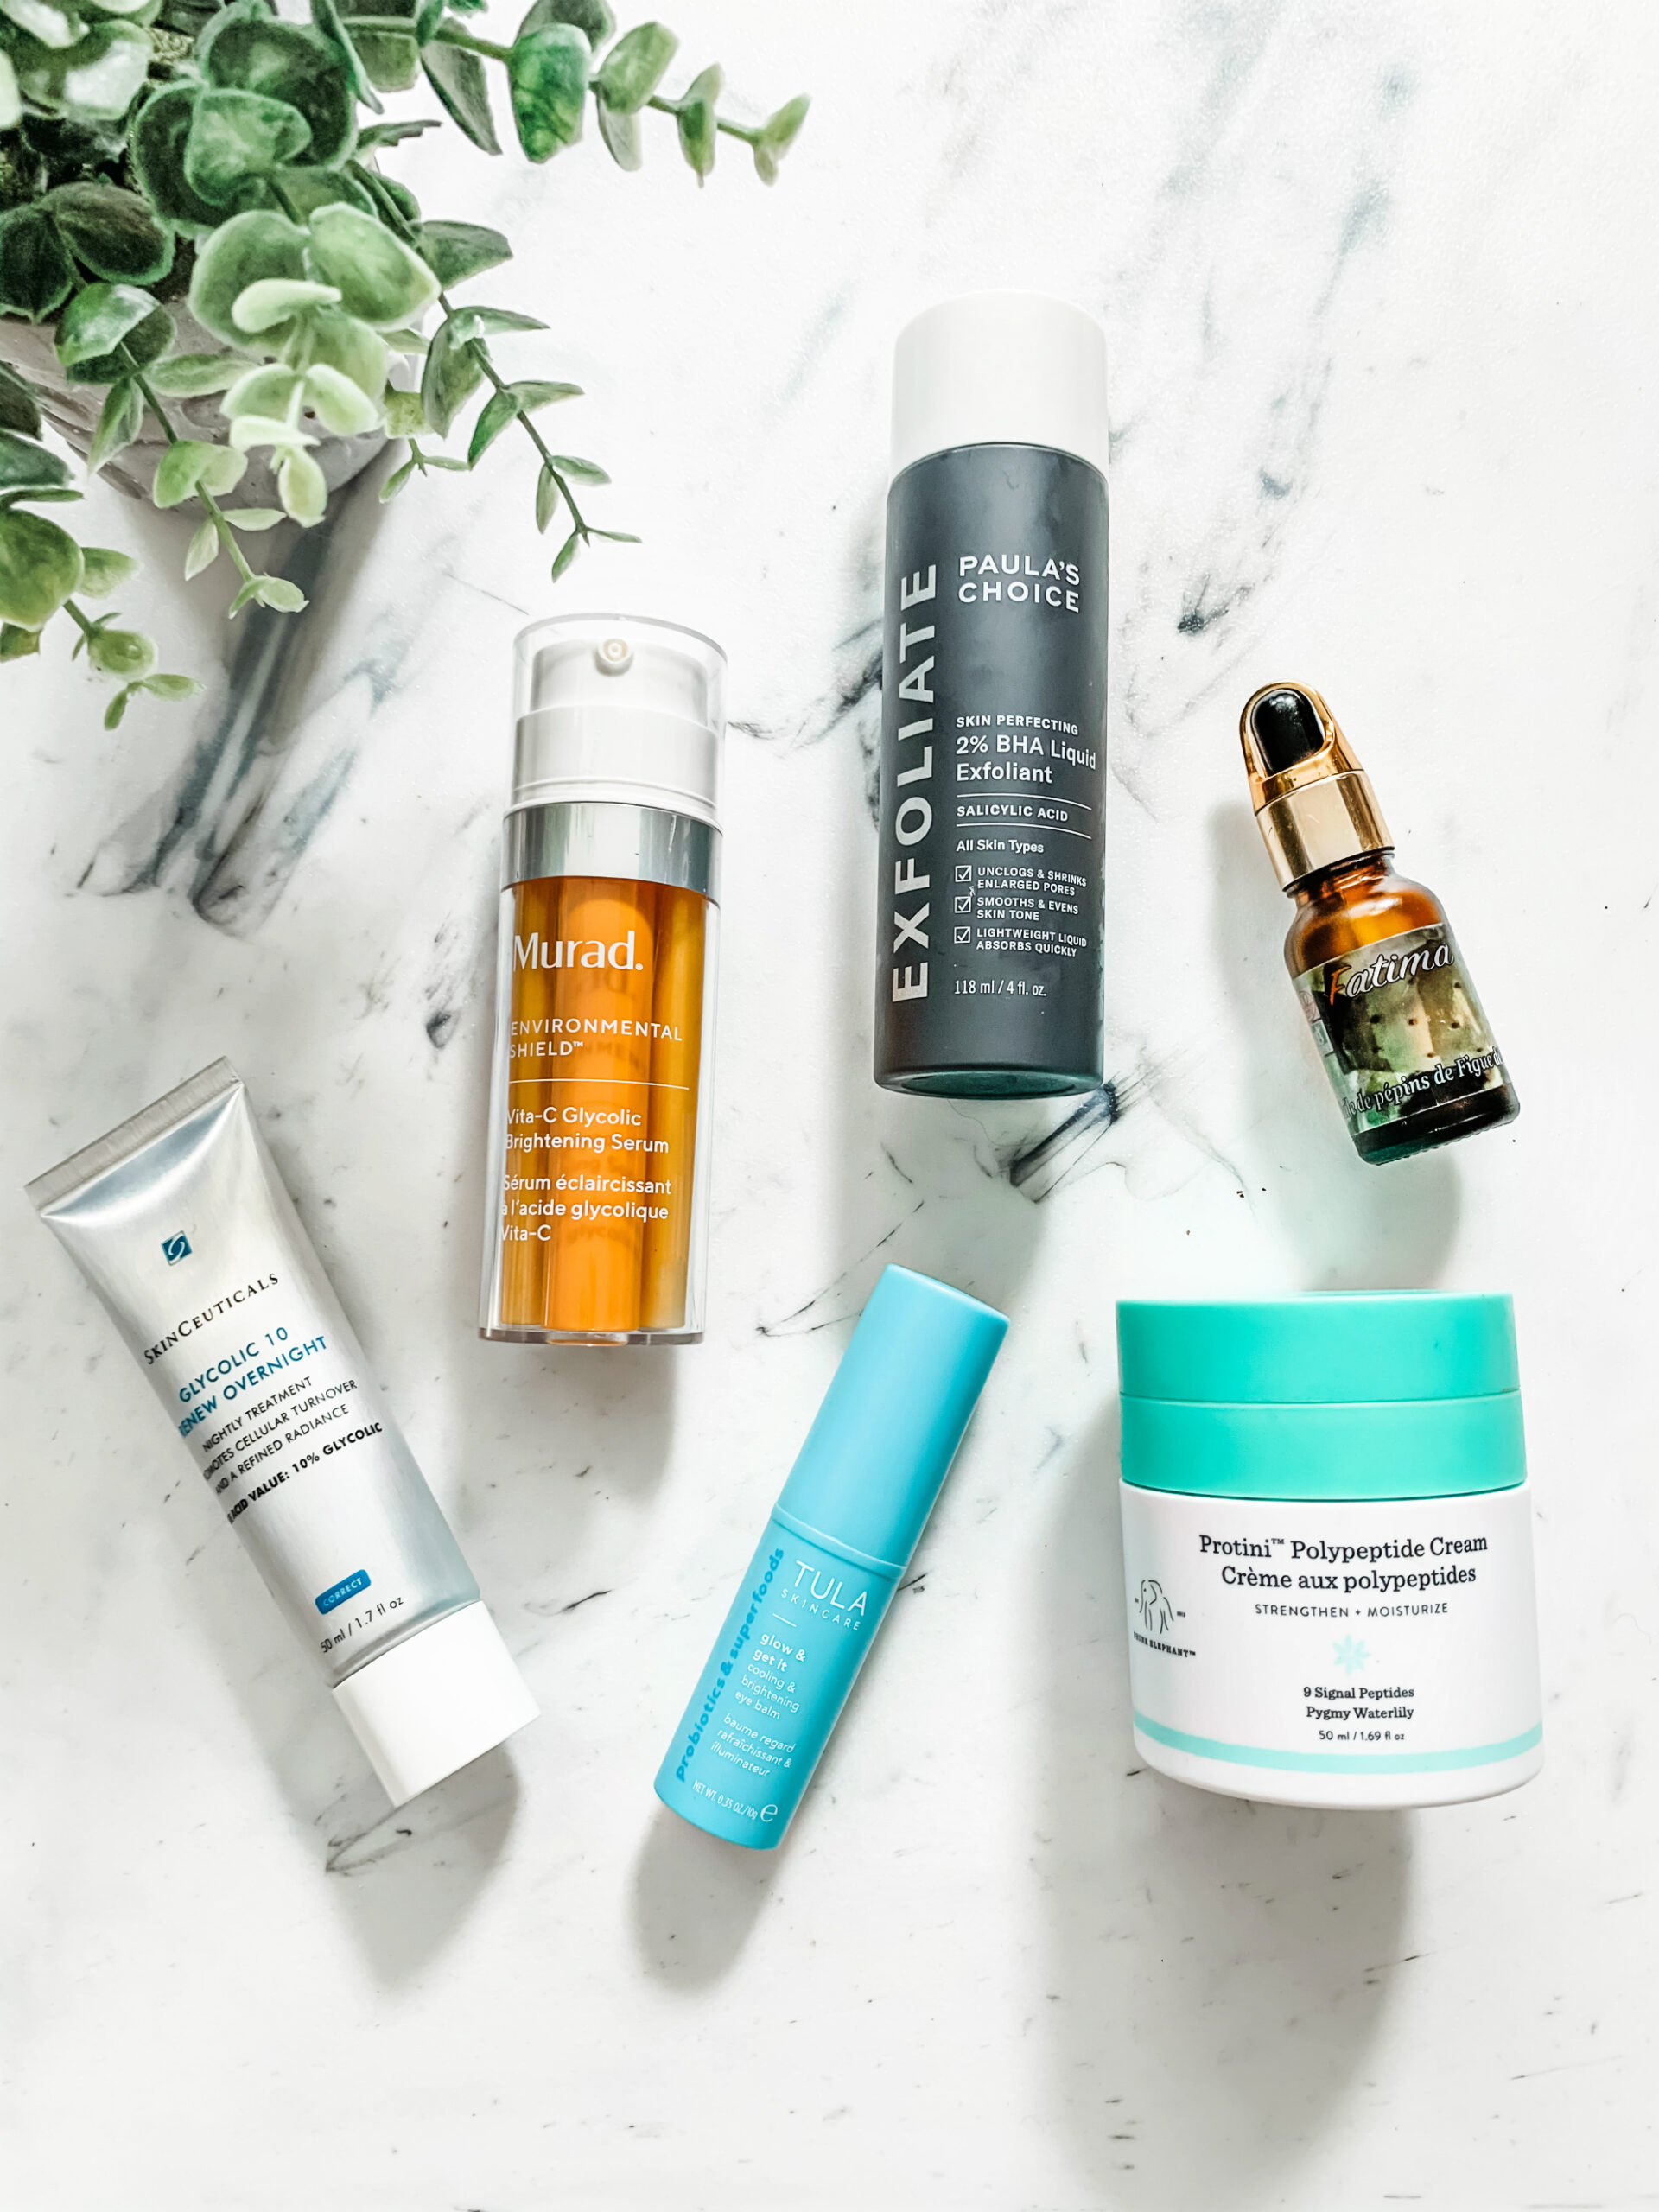 20 Beauty Products I'm So Glad I Tried, Quarantine Skin Routine, Tilden of To Be Bright